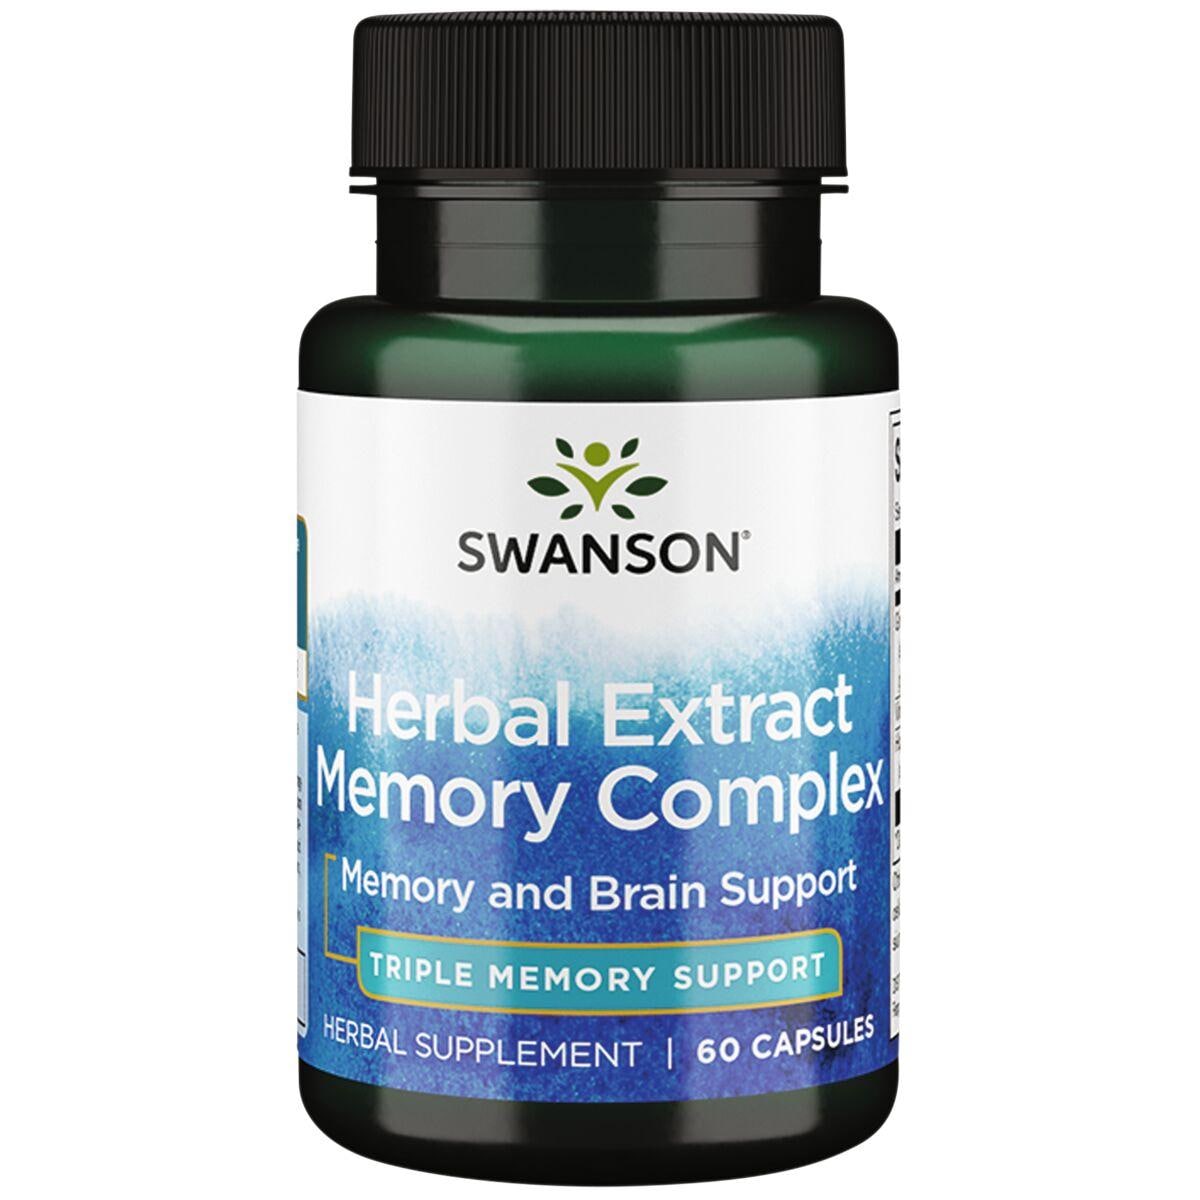 Swanson Ultra Herbal Extract Memory Complex Vitamin | 60 Caps